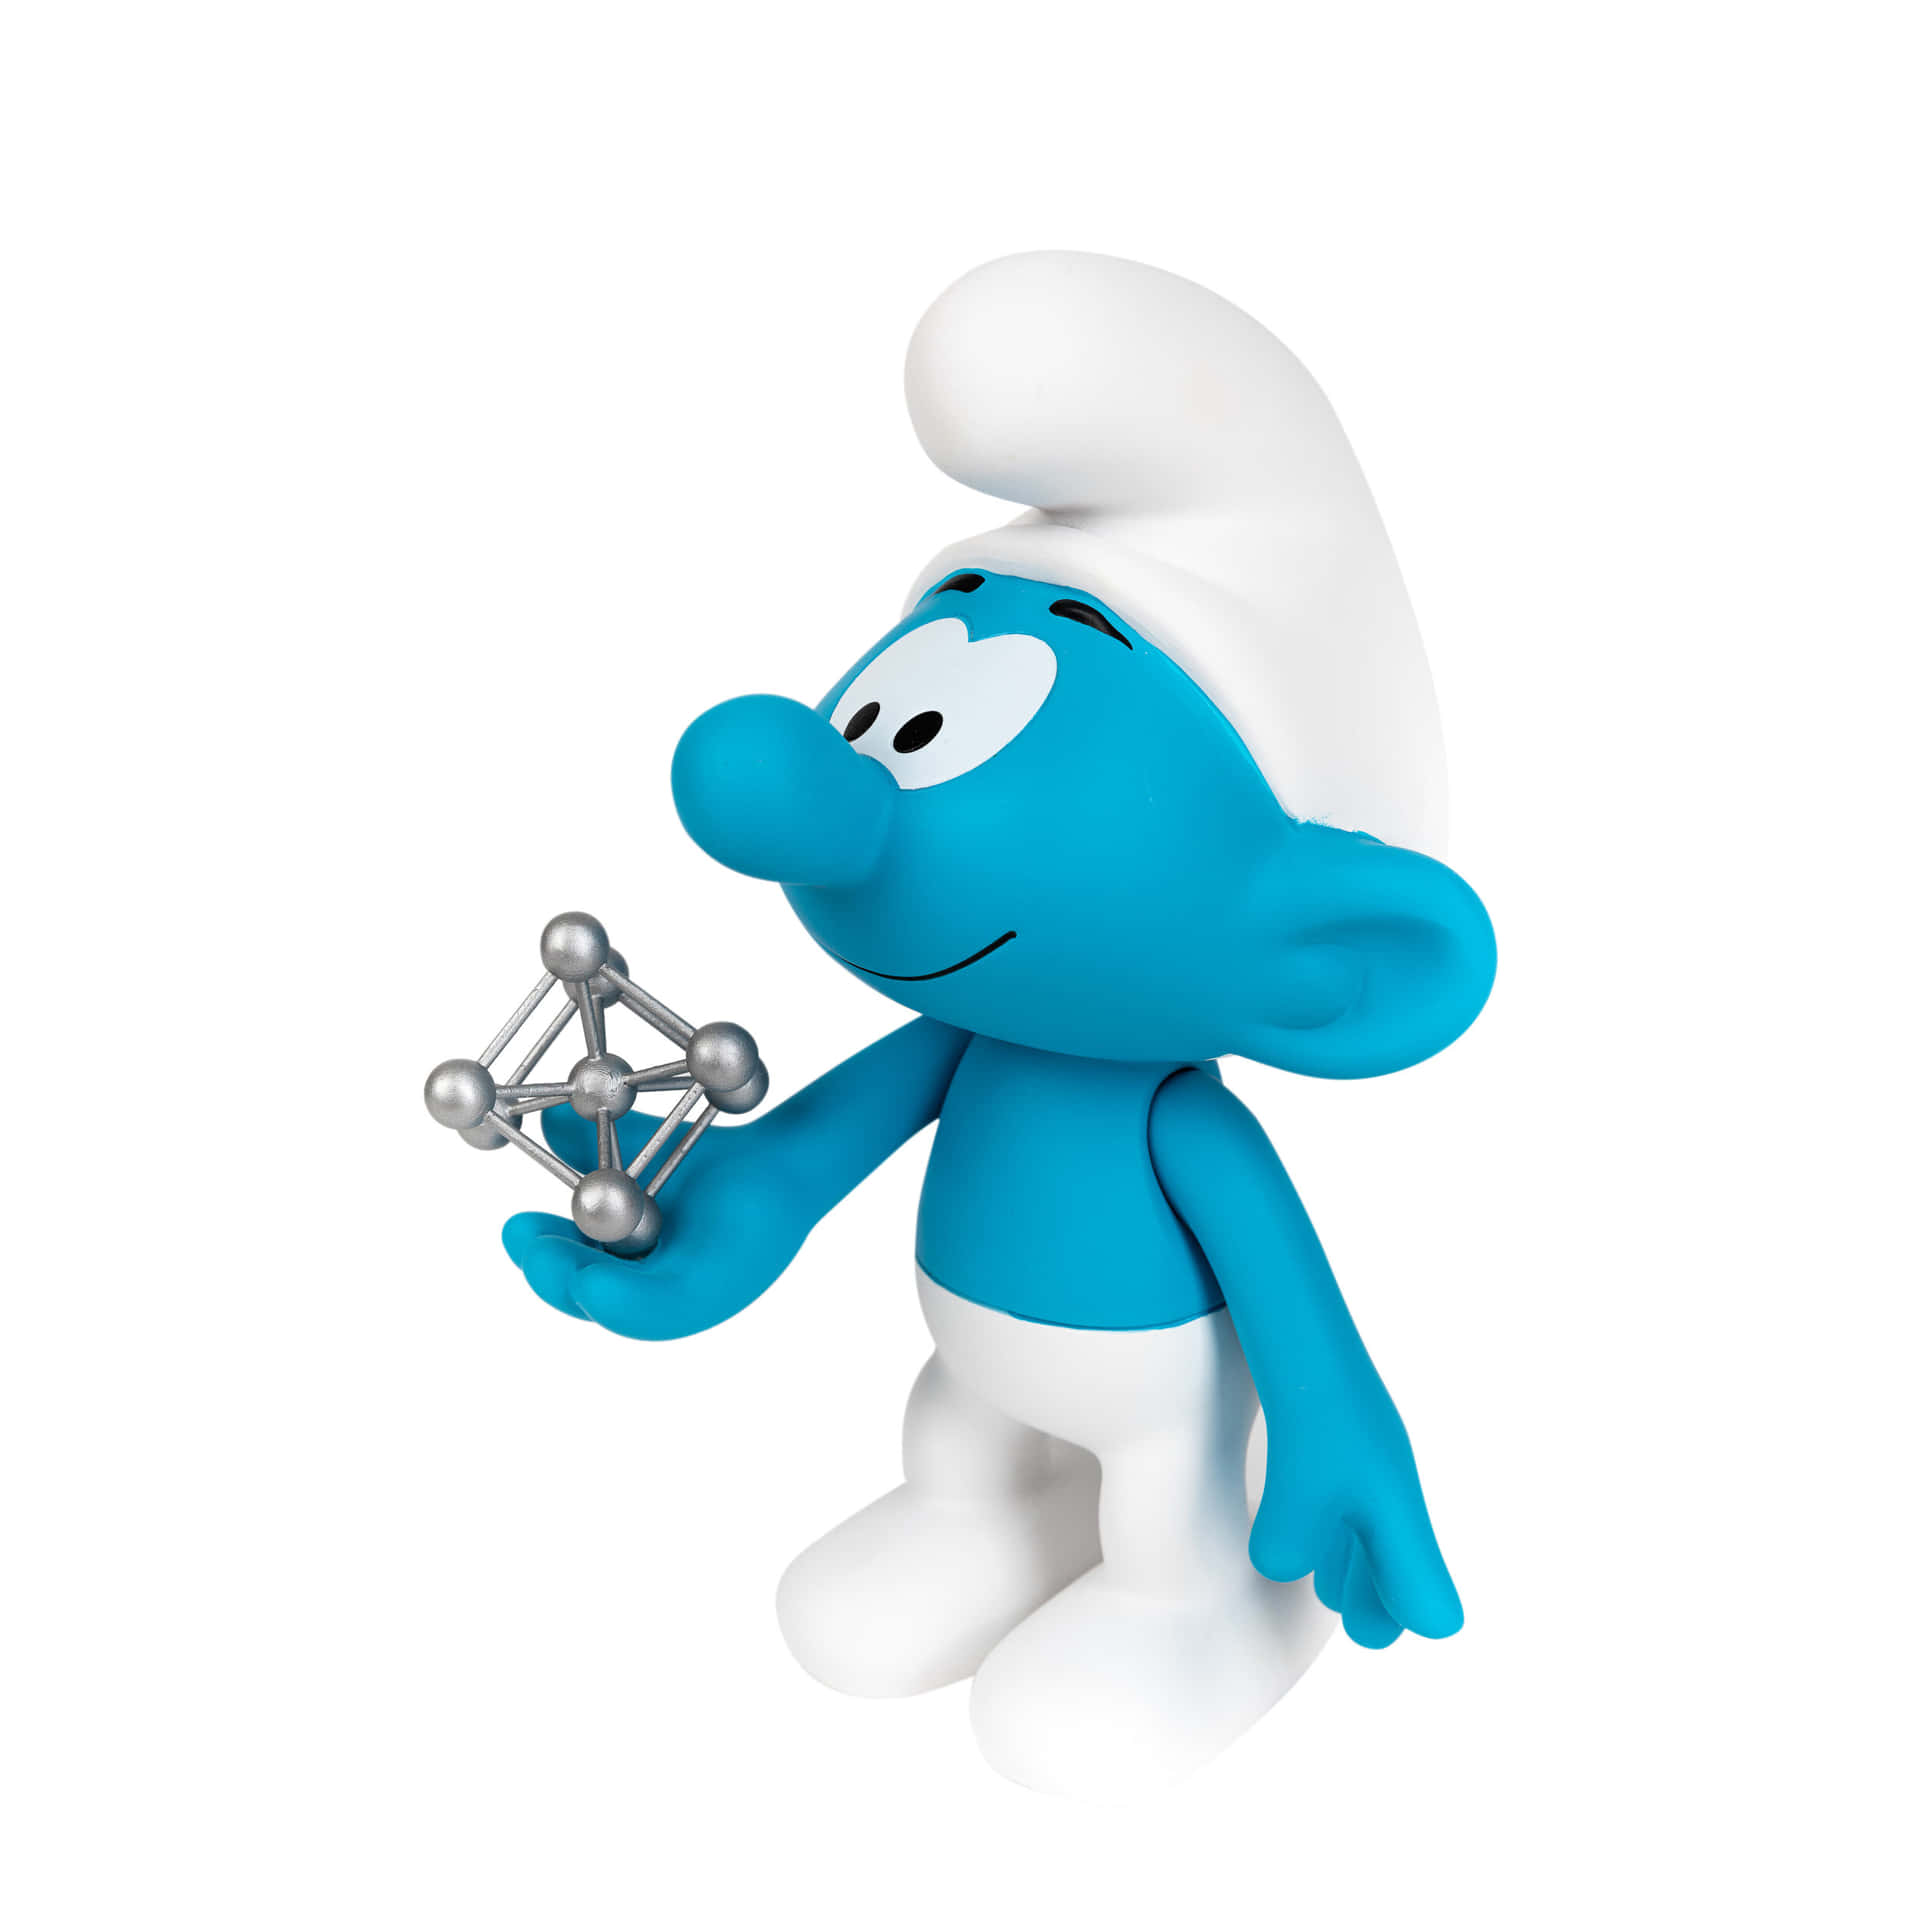 "Create your own Smurf Adventures!"